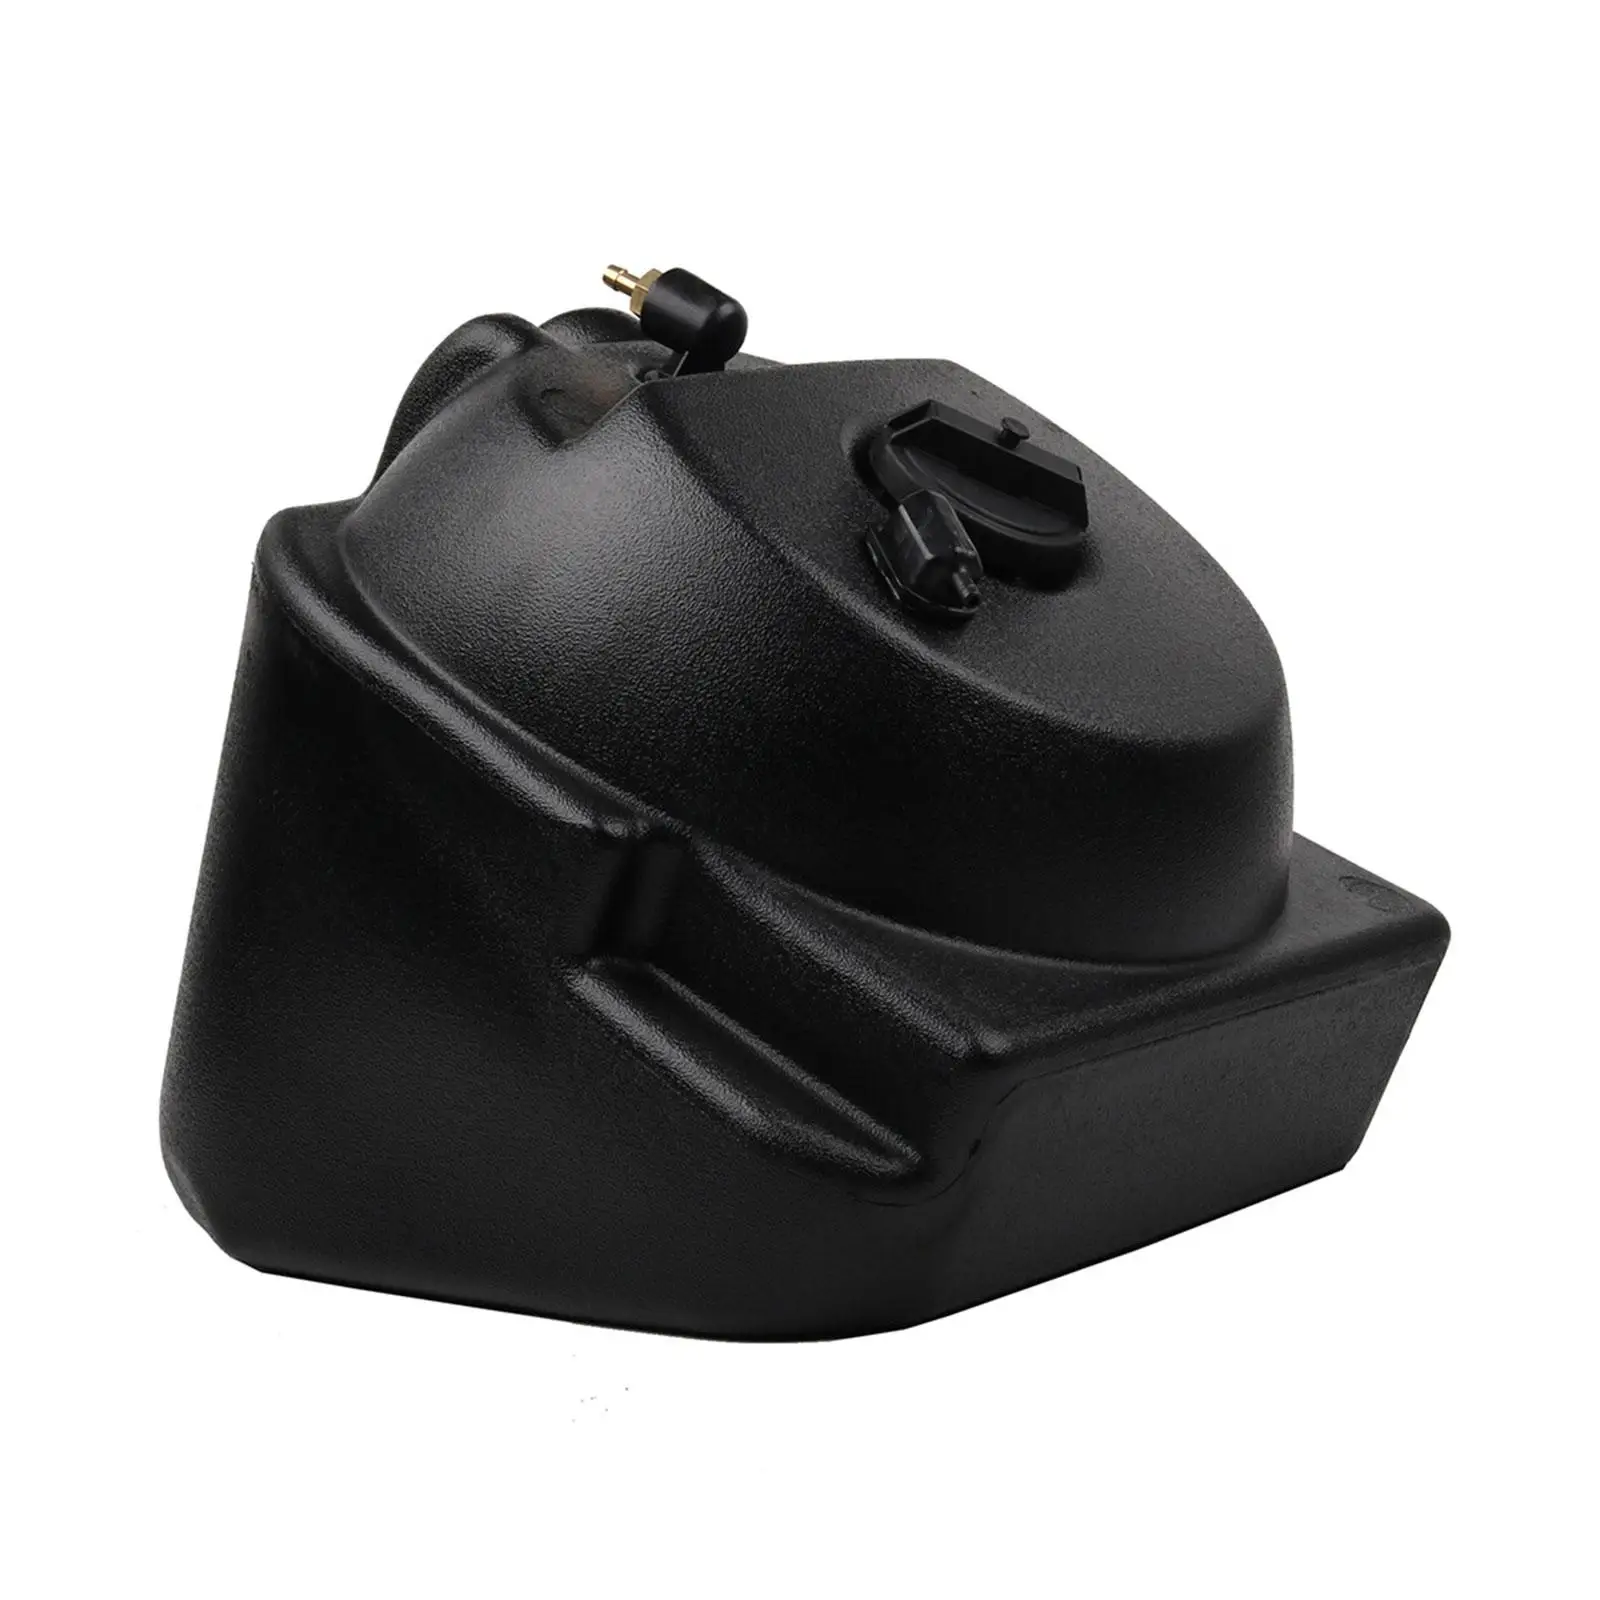 Auxiliary Fuel Tank Easy Installation Motorcycle Accessories Mounting Hardware Oil Tank Fuel Tank Oil Box for Yamaha